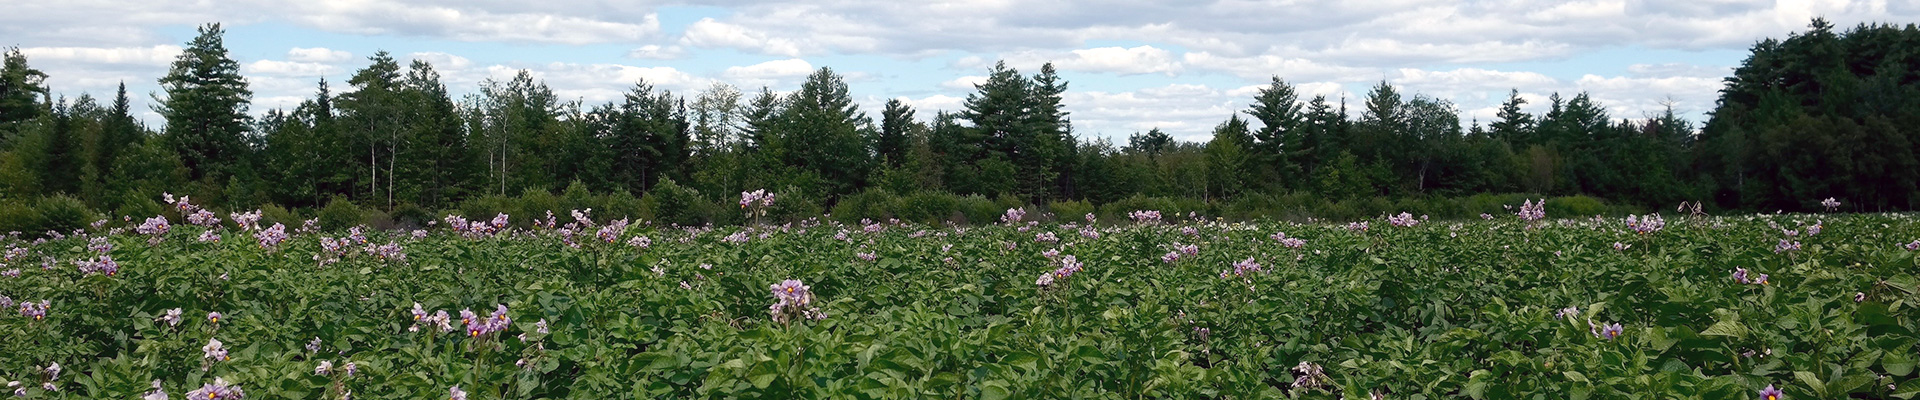 A landscape showing a potato field in Maine during late summer